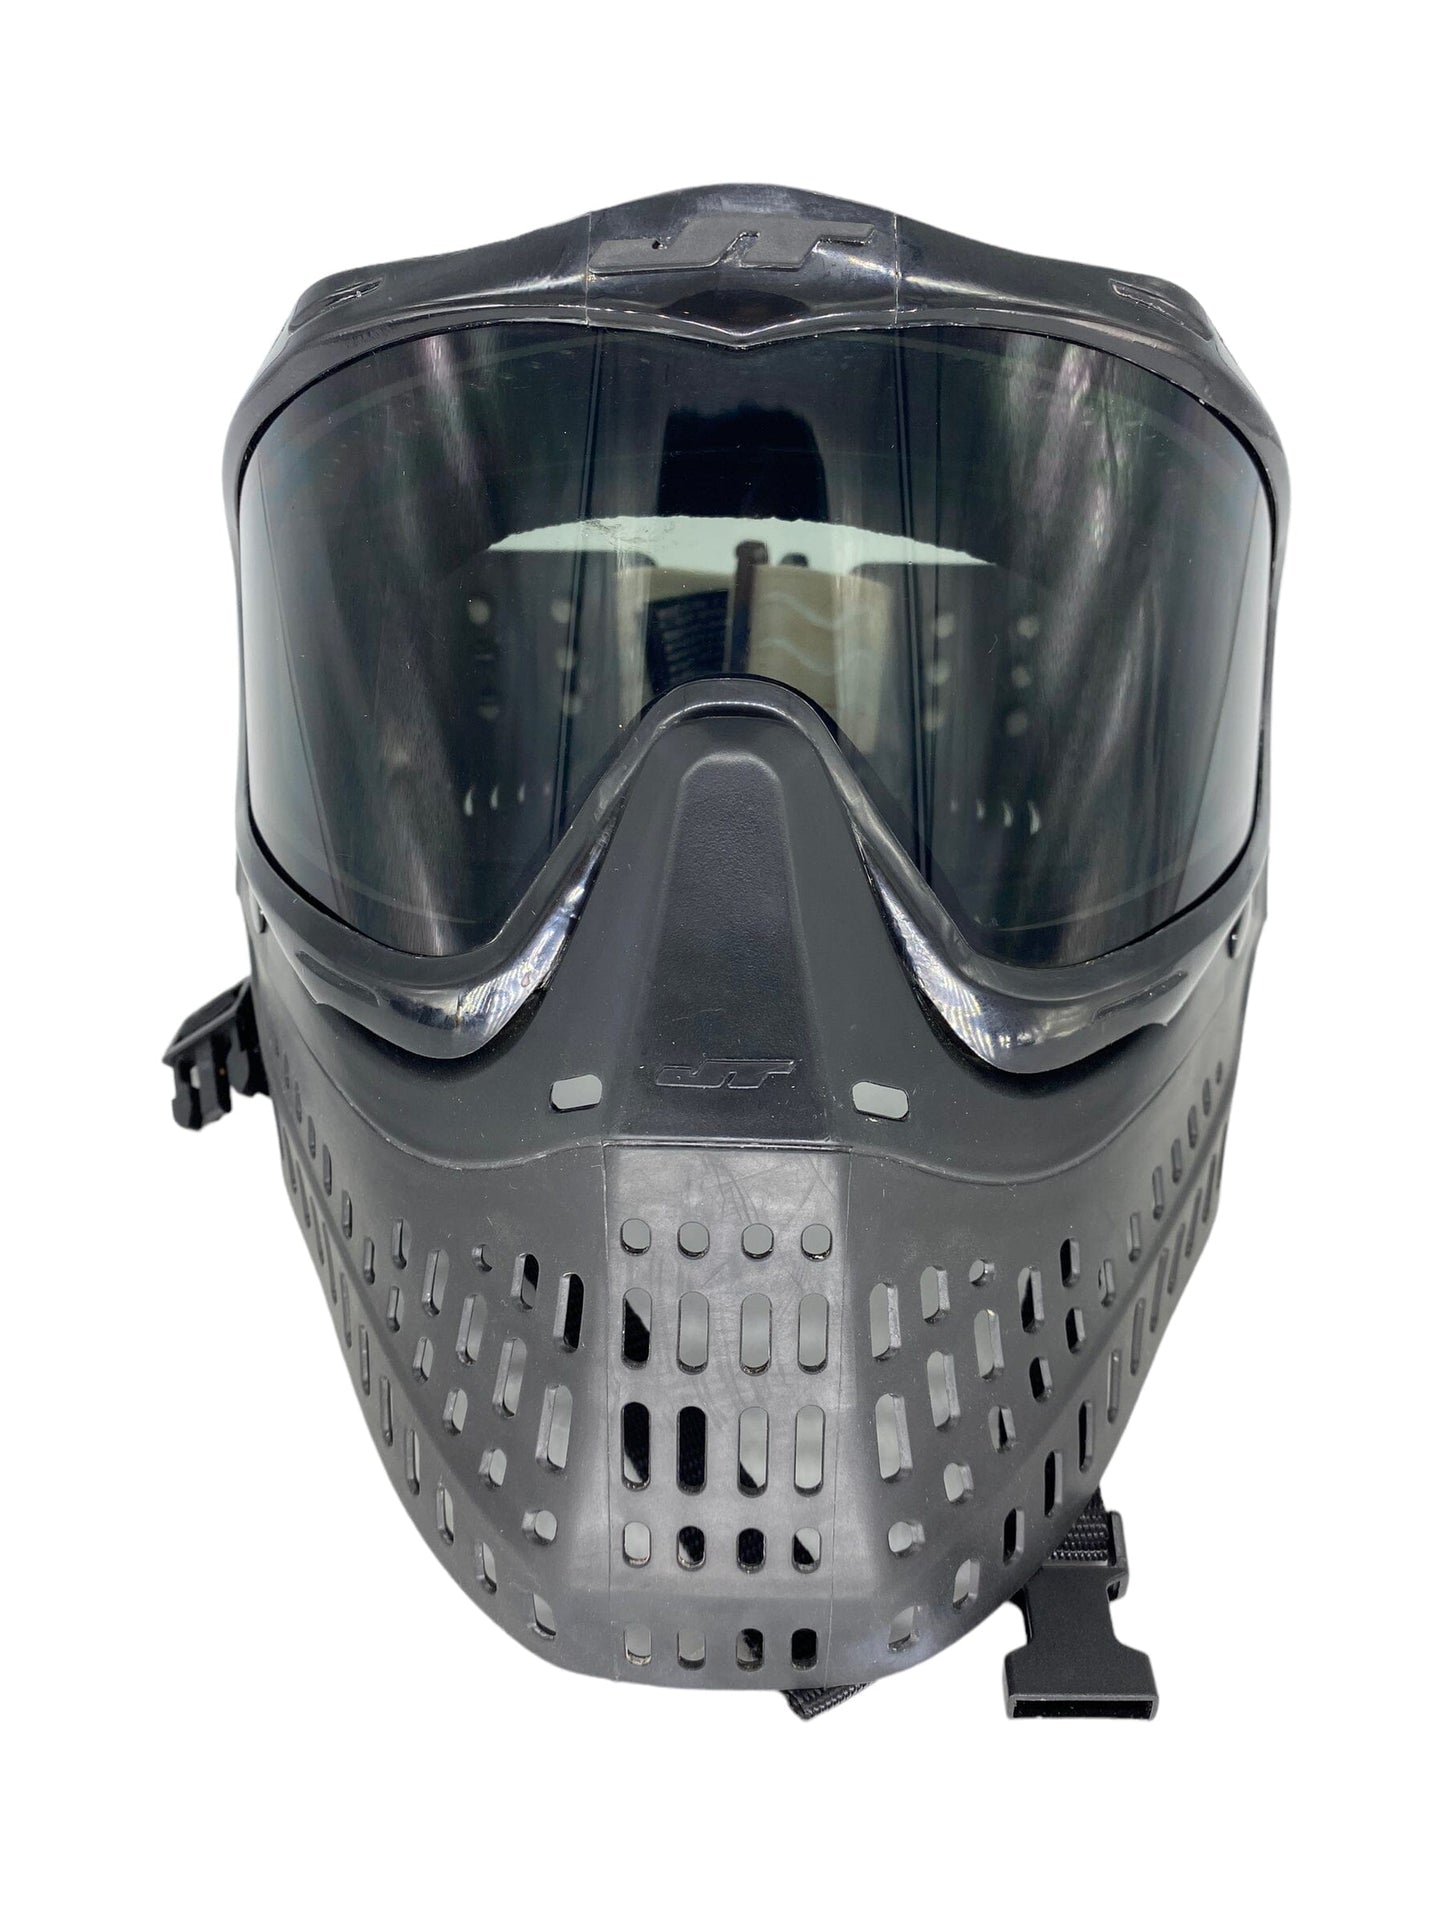 Used Jt Pro-flex Mask Goggle Paintball Gun from CPXBrosPaintball Buy/Sell/Trade Paintball Markers, Paintball Hoppers, Paintball Masks, and Hormesis Headbands